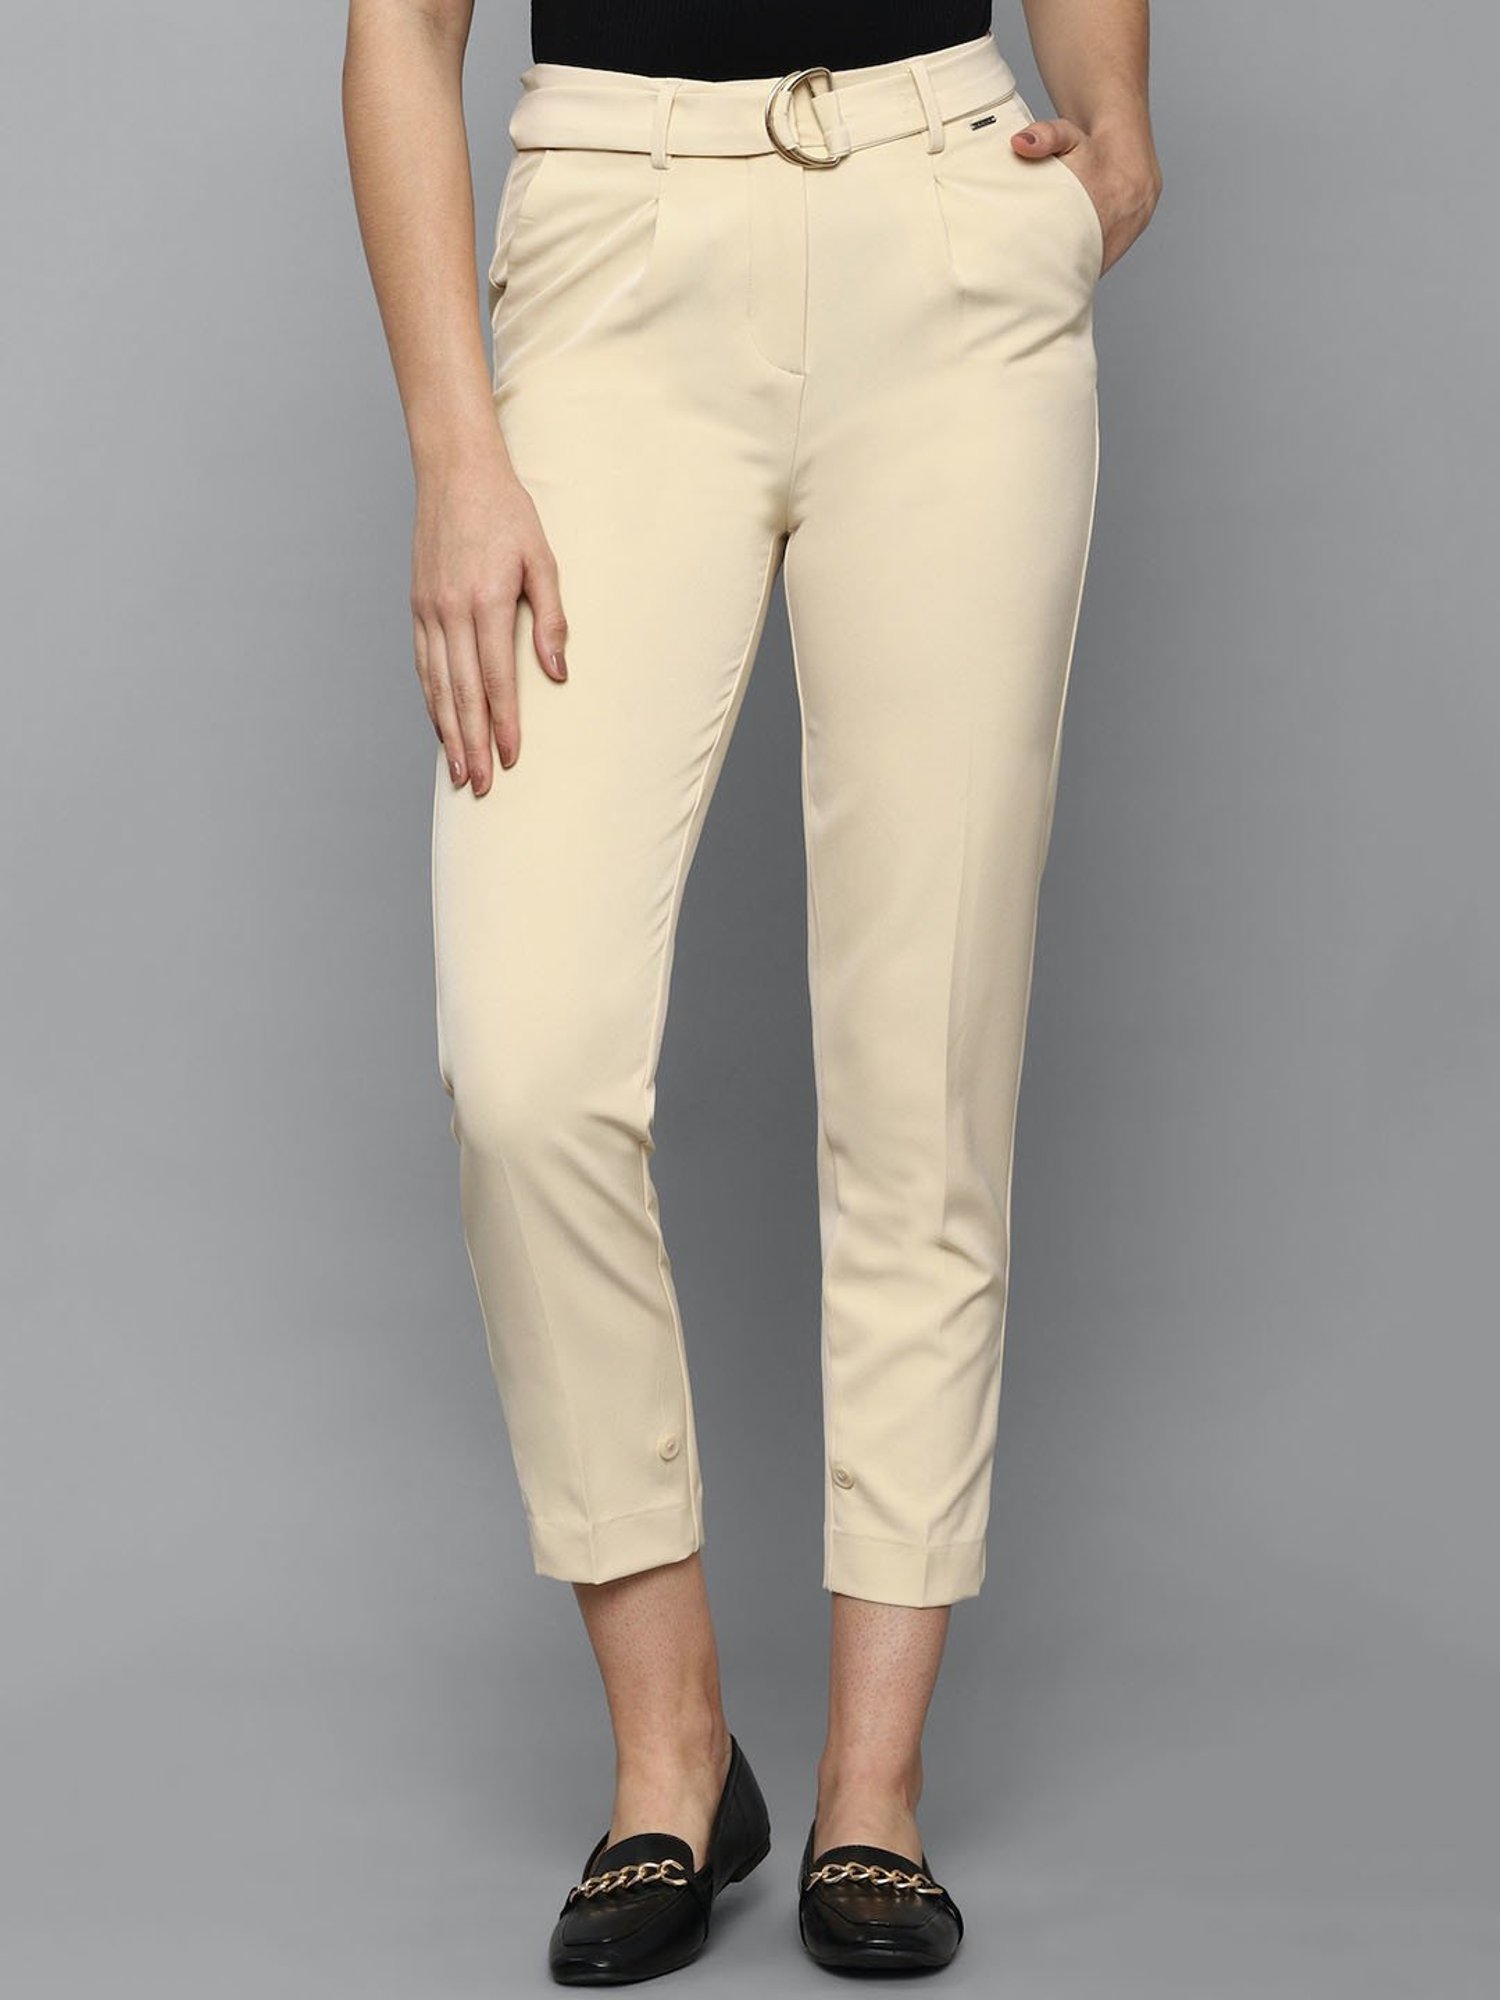 Buy Allen Solly Trousers online  Women  104 products  FASHIOLAin